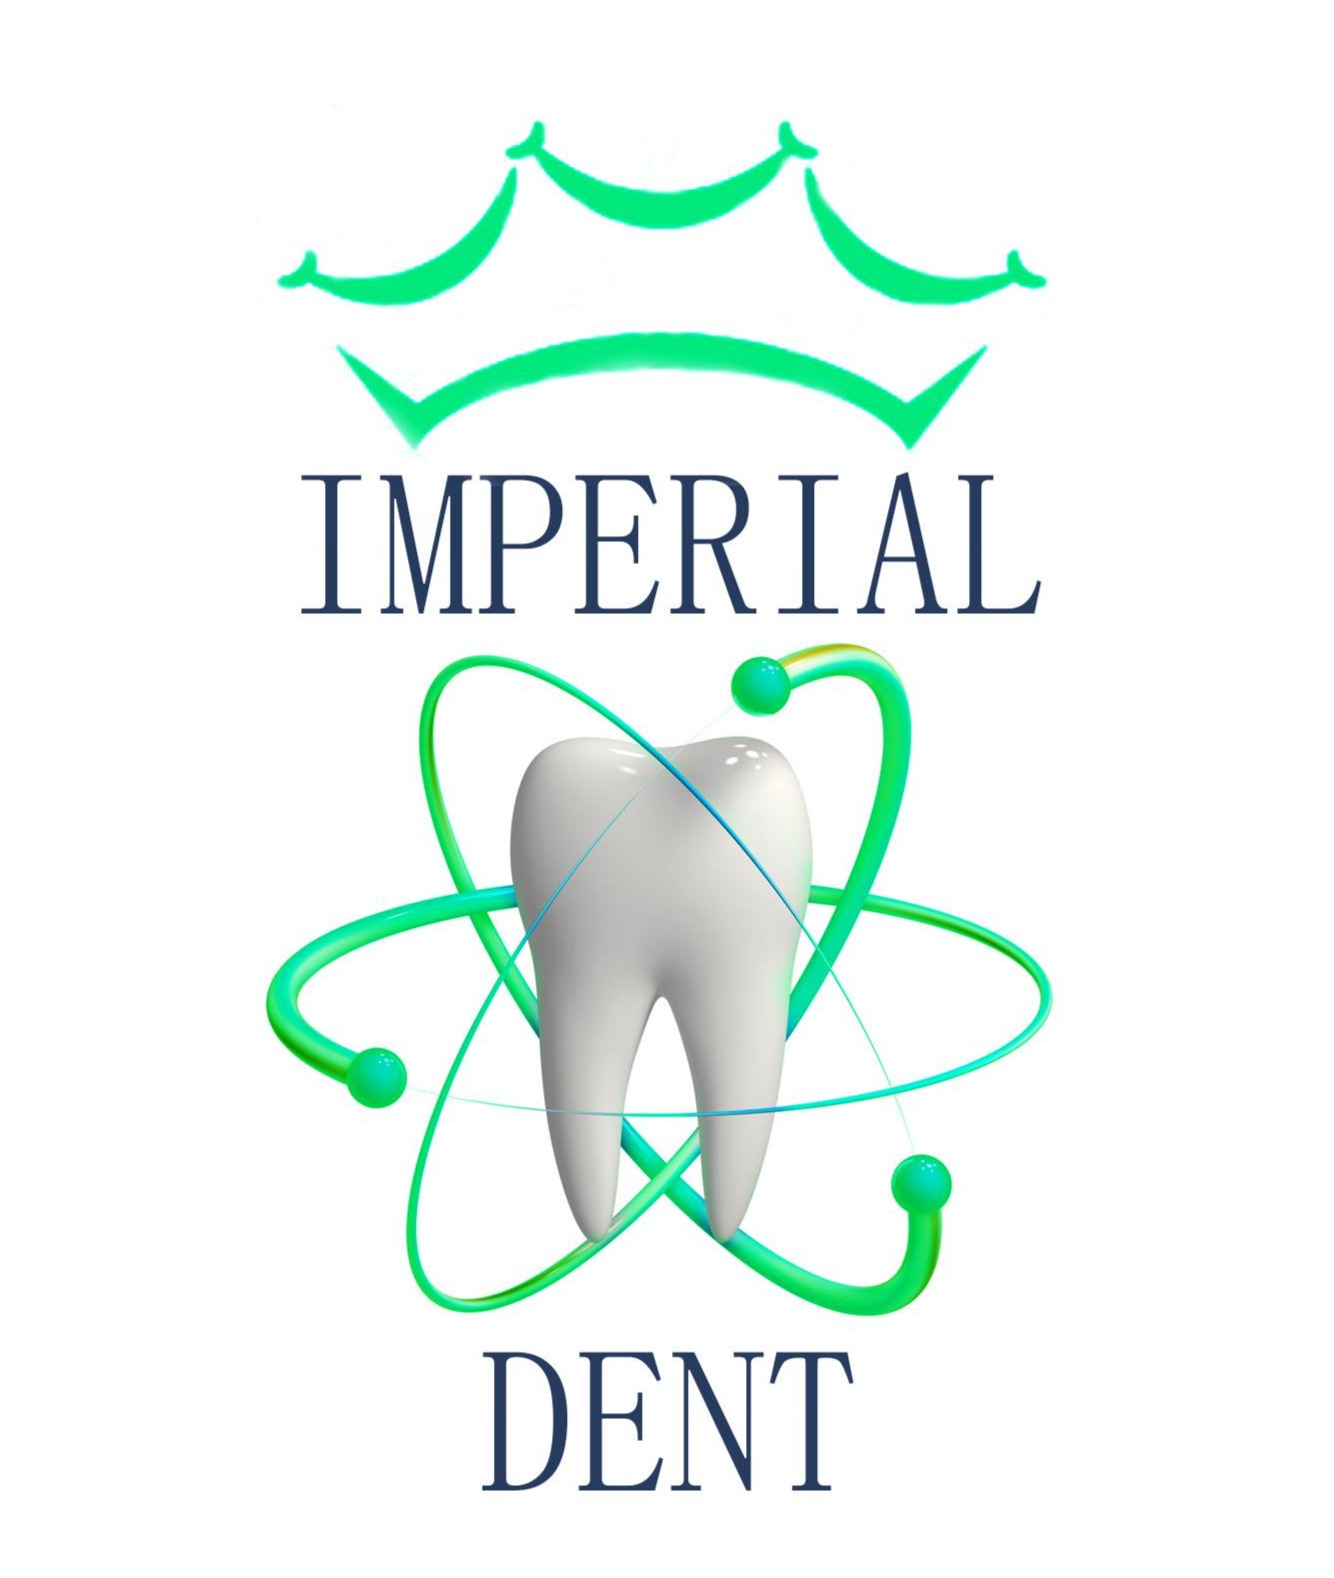 Imperial Dent